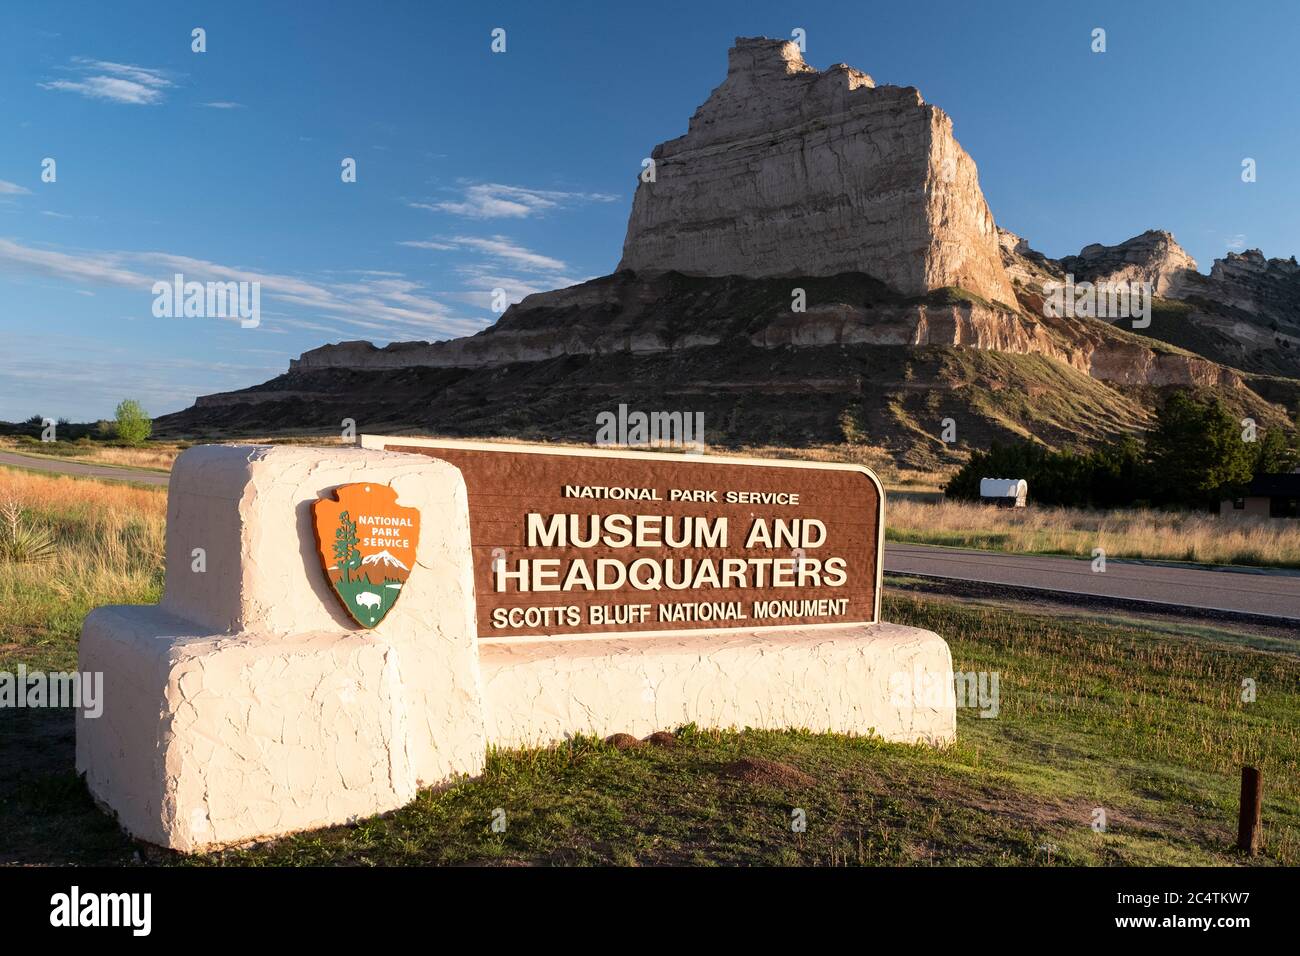 Sign for the headquarters and museum at Scotts Bluff National Monument along the Oregon Trail, Nebraska Stock Photo